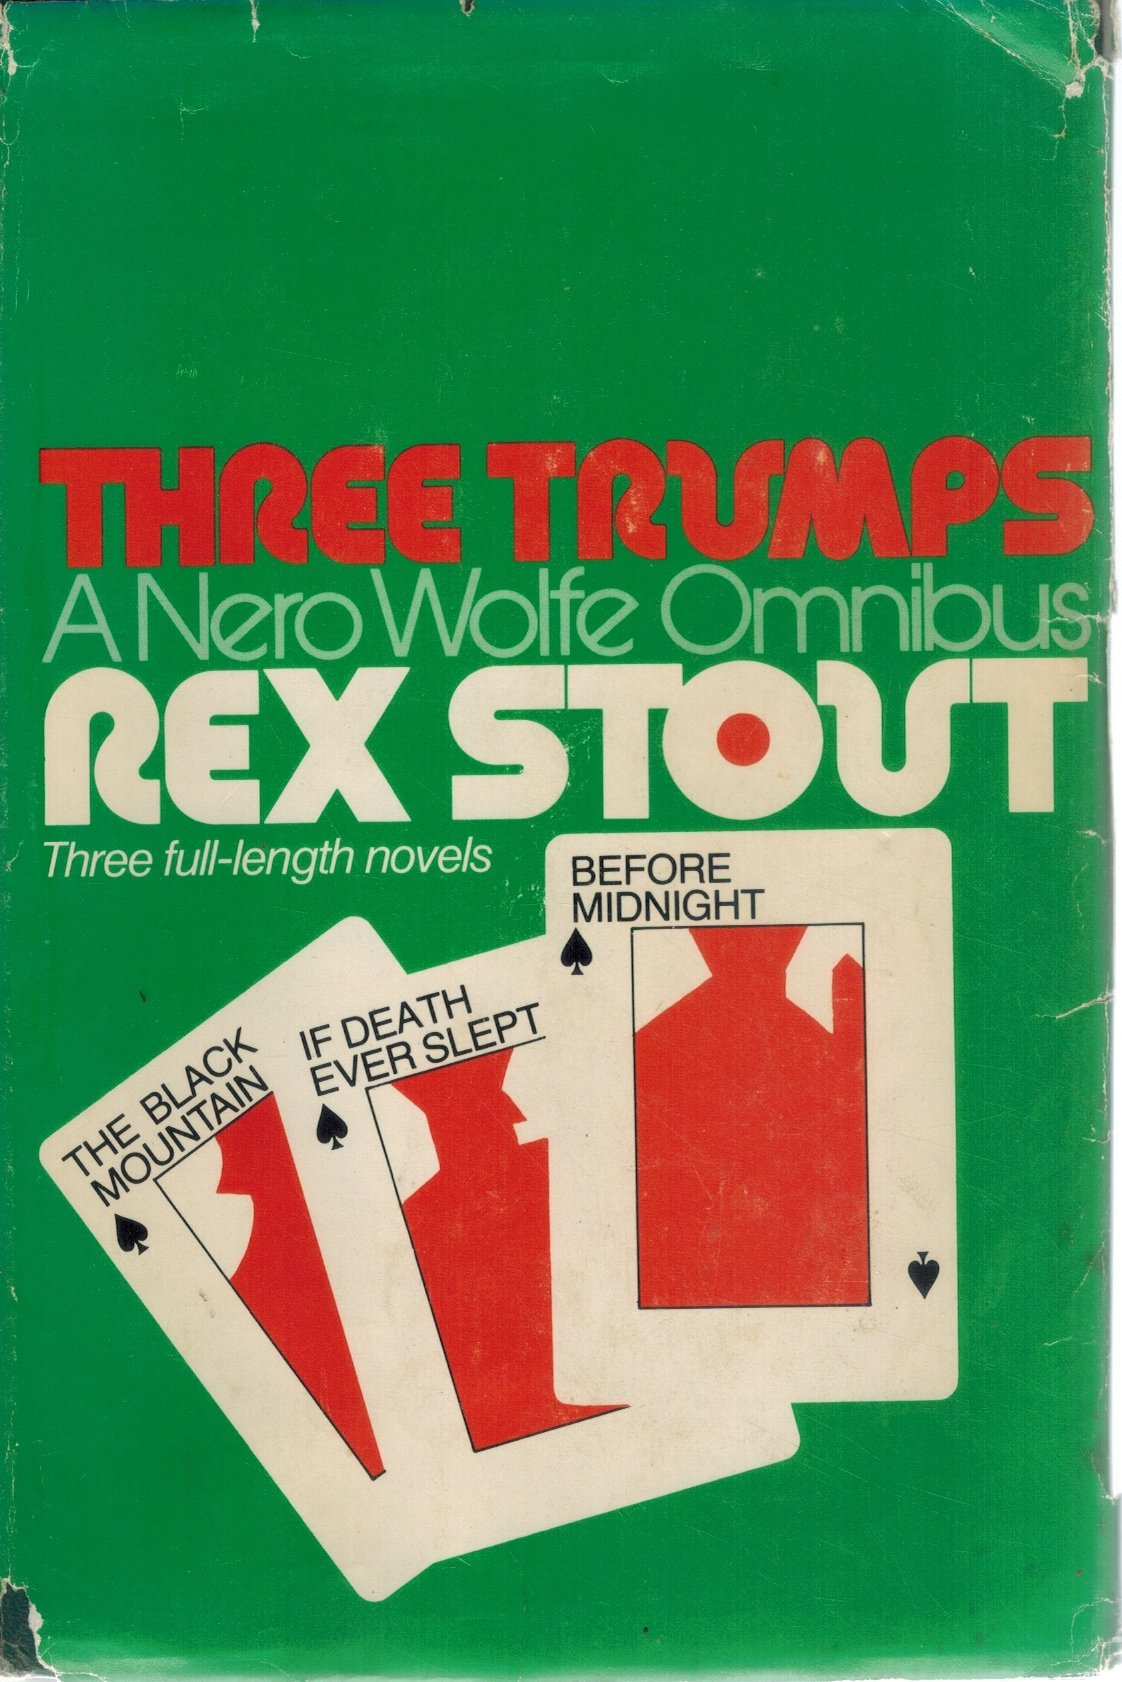 THREE TRUMPS, A NERO WOLFE OMNIBUS  The Black Mountain / If Death Ever  Slept / Before Midnight  by Stout, Rex